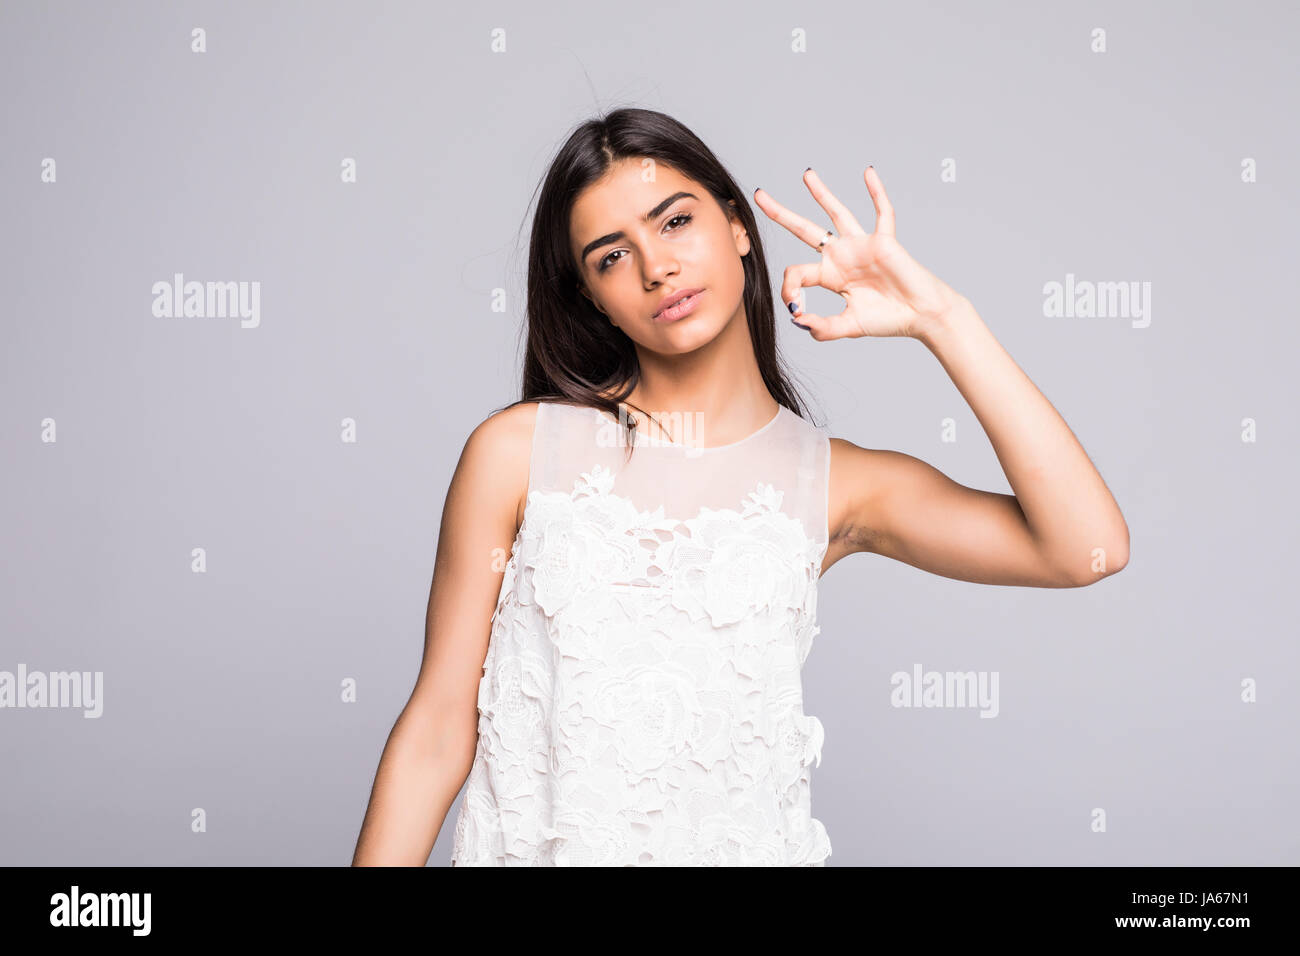 Young lighthearted girl shows Okay gesture, isolated on grey background Stock Photo